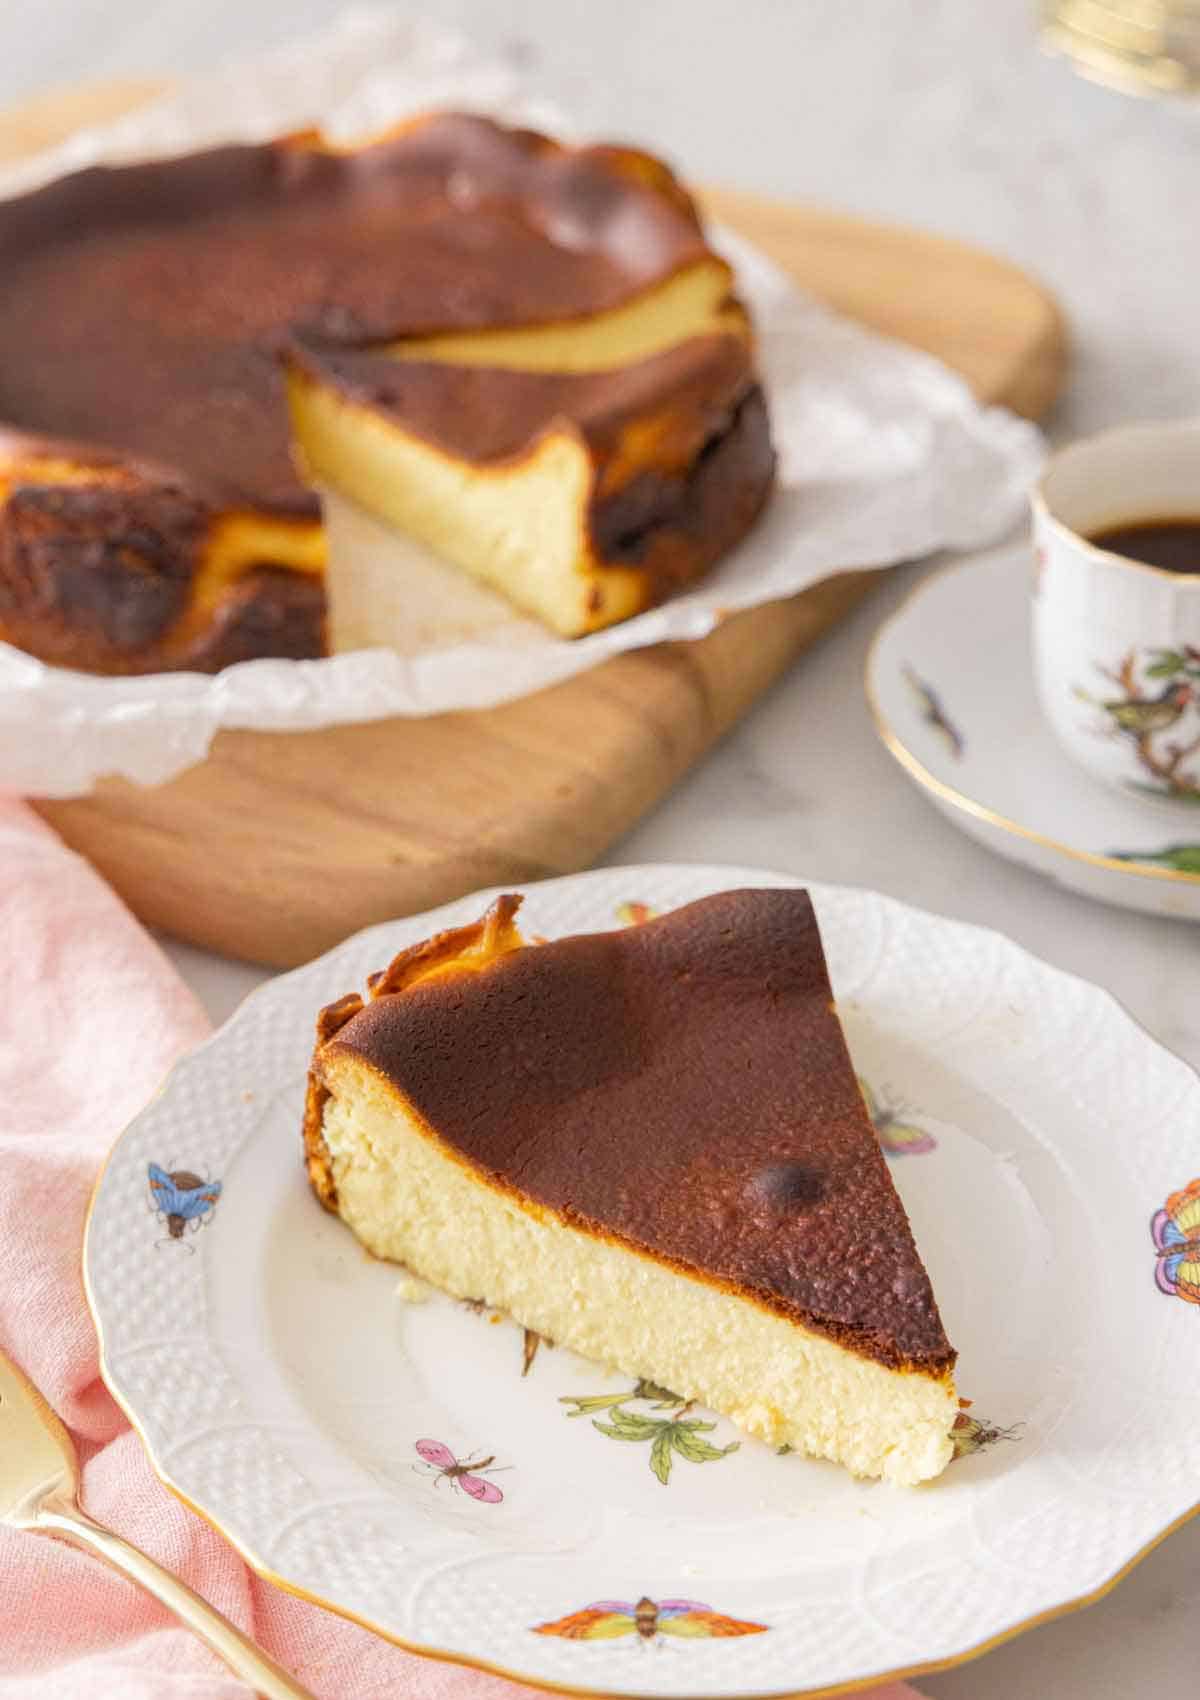 A slice of basque cheesecake on a plate in front the rest of the cake.